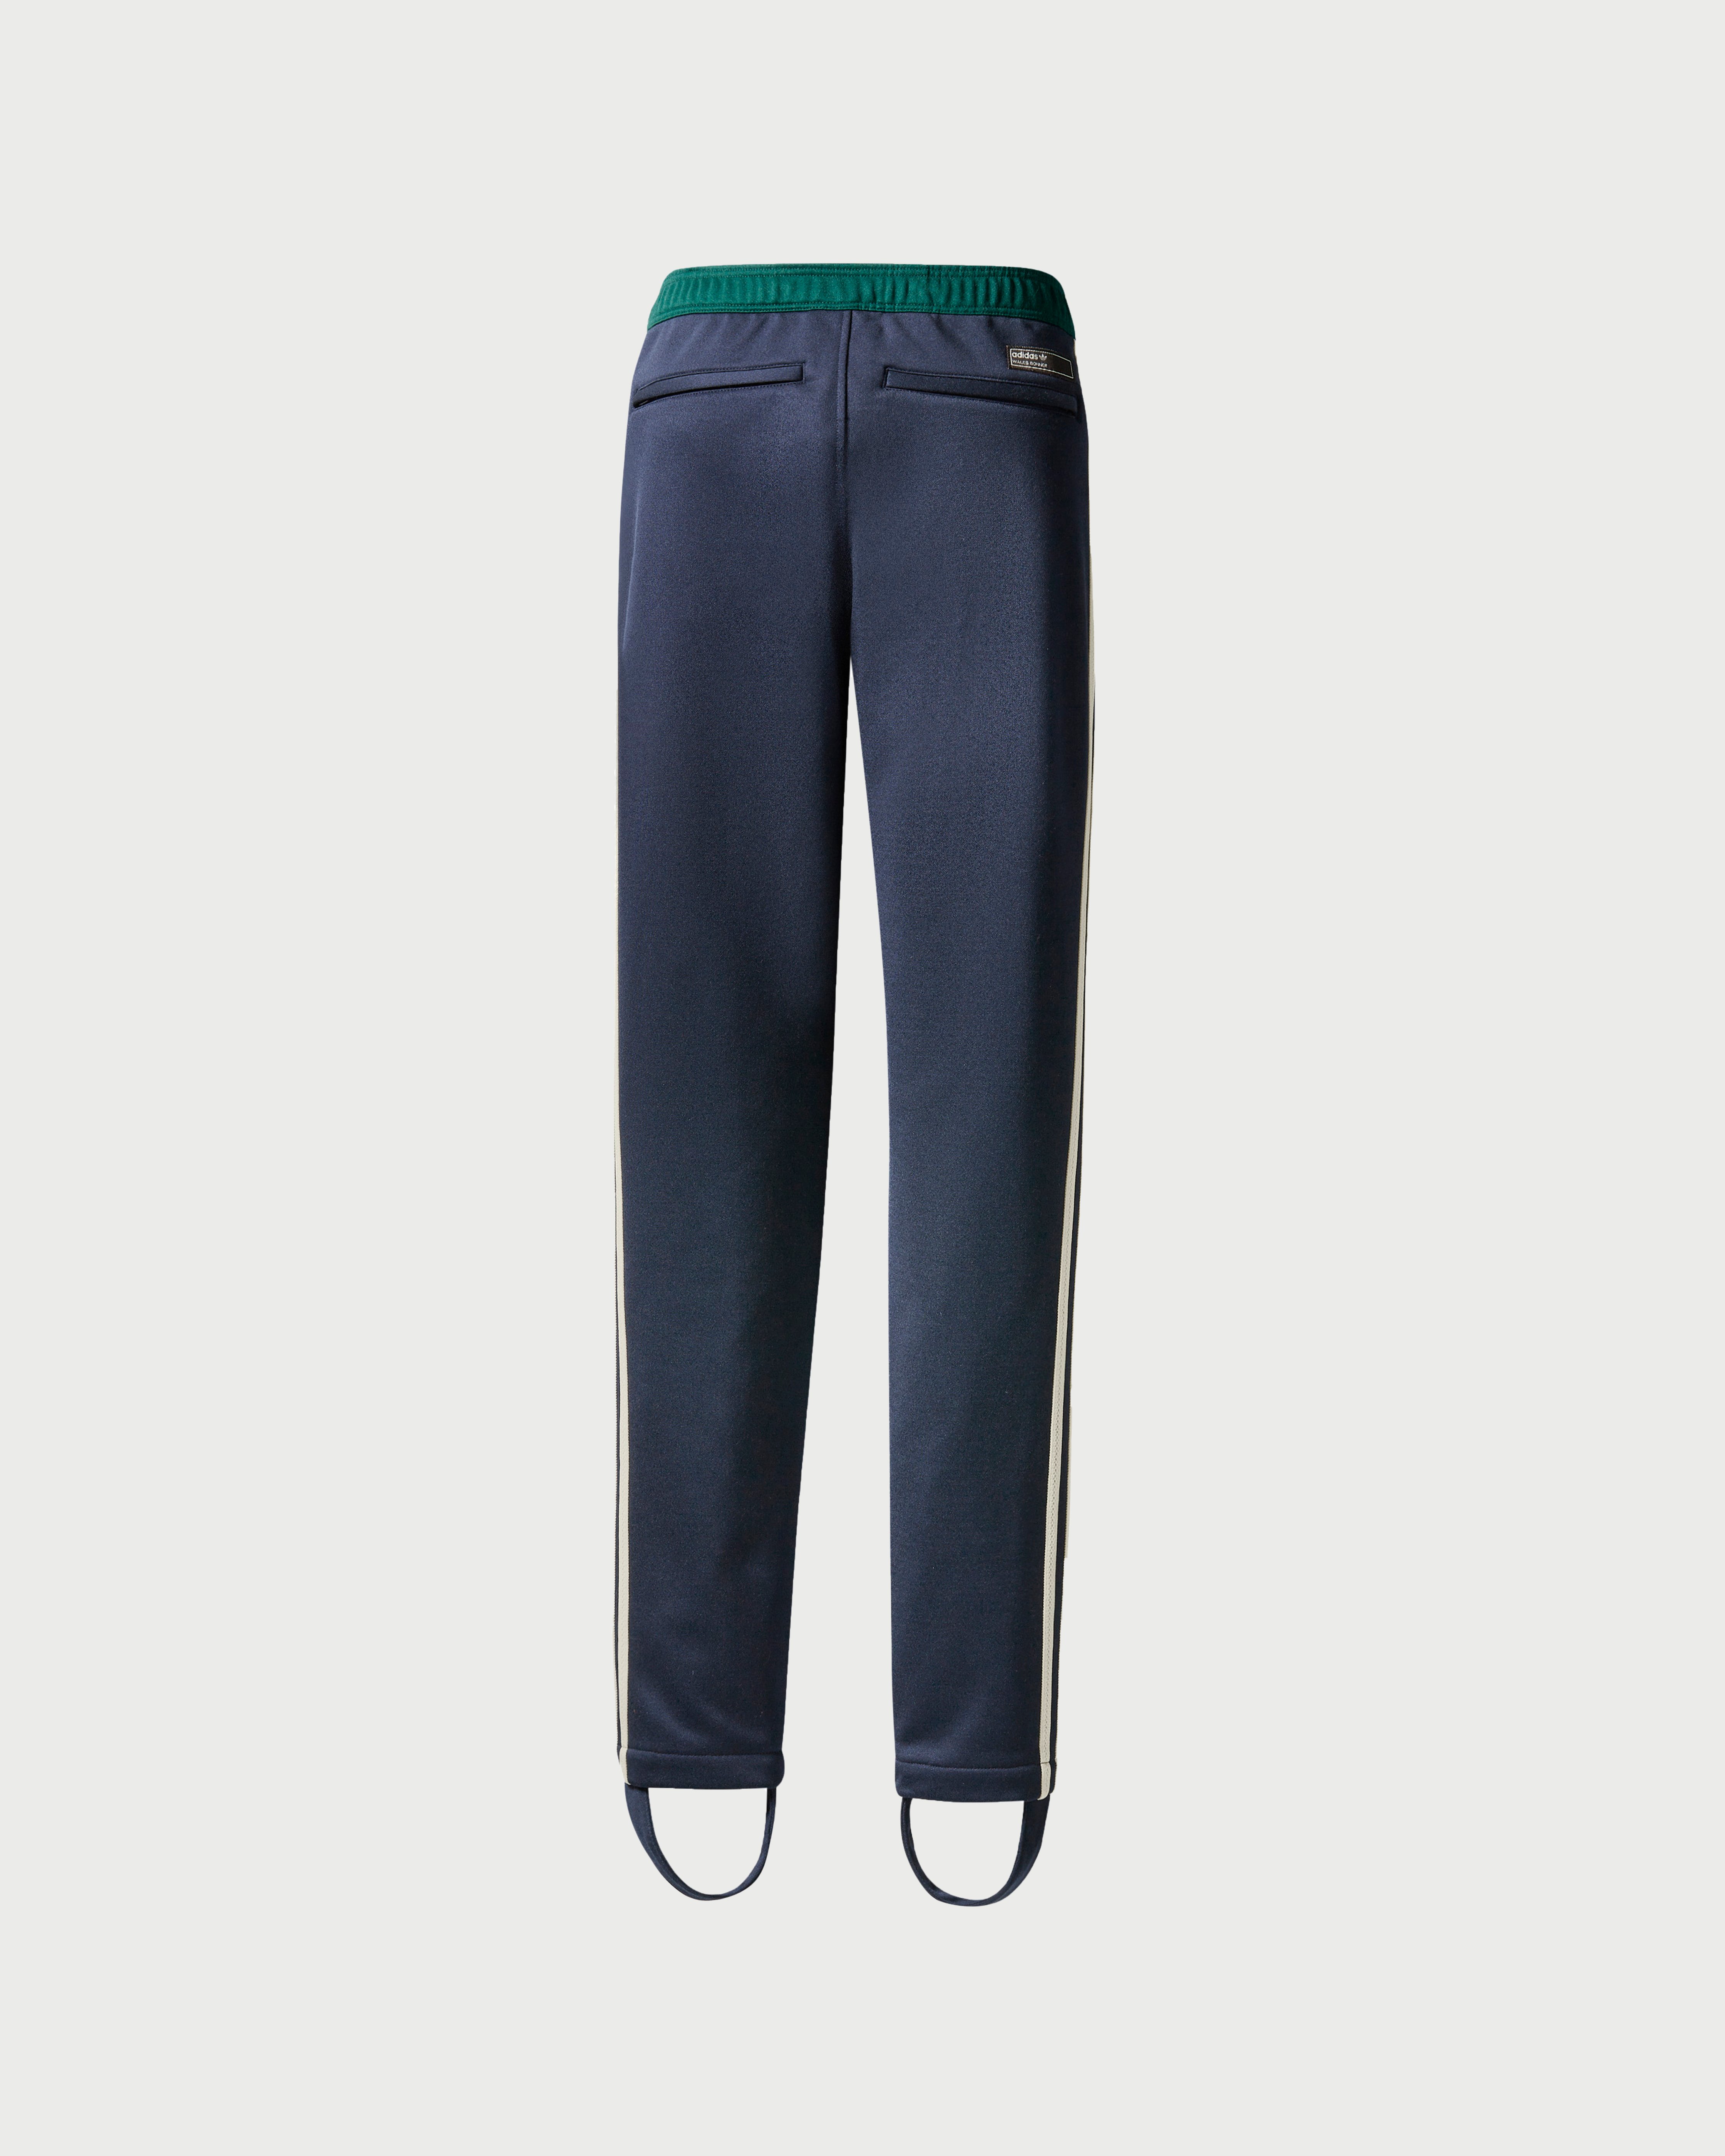 Adidas x Wales Bonner - Lovers Trousers Navy - Clothing - Blue - Image 2